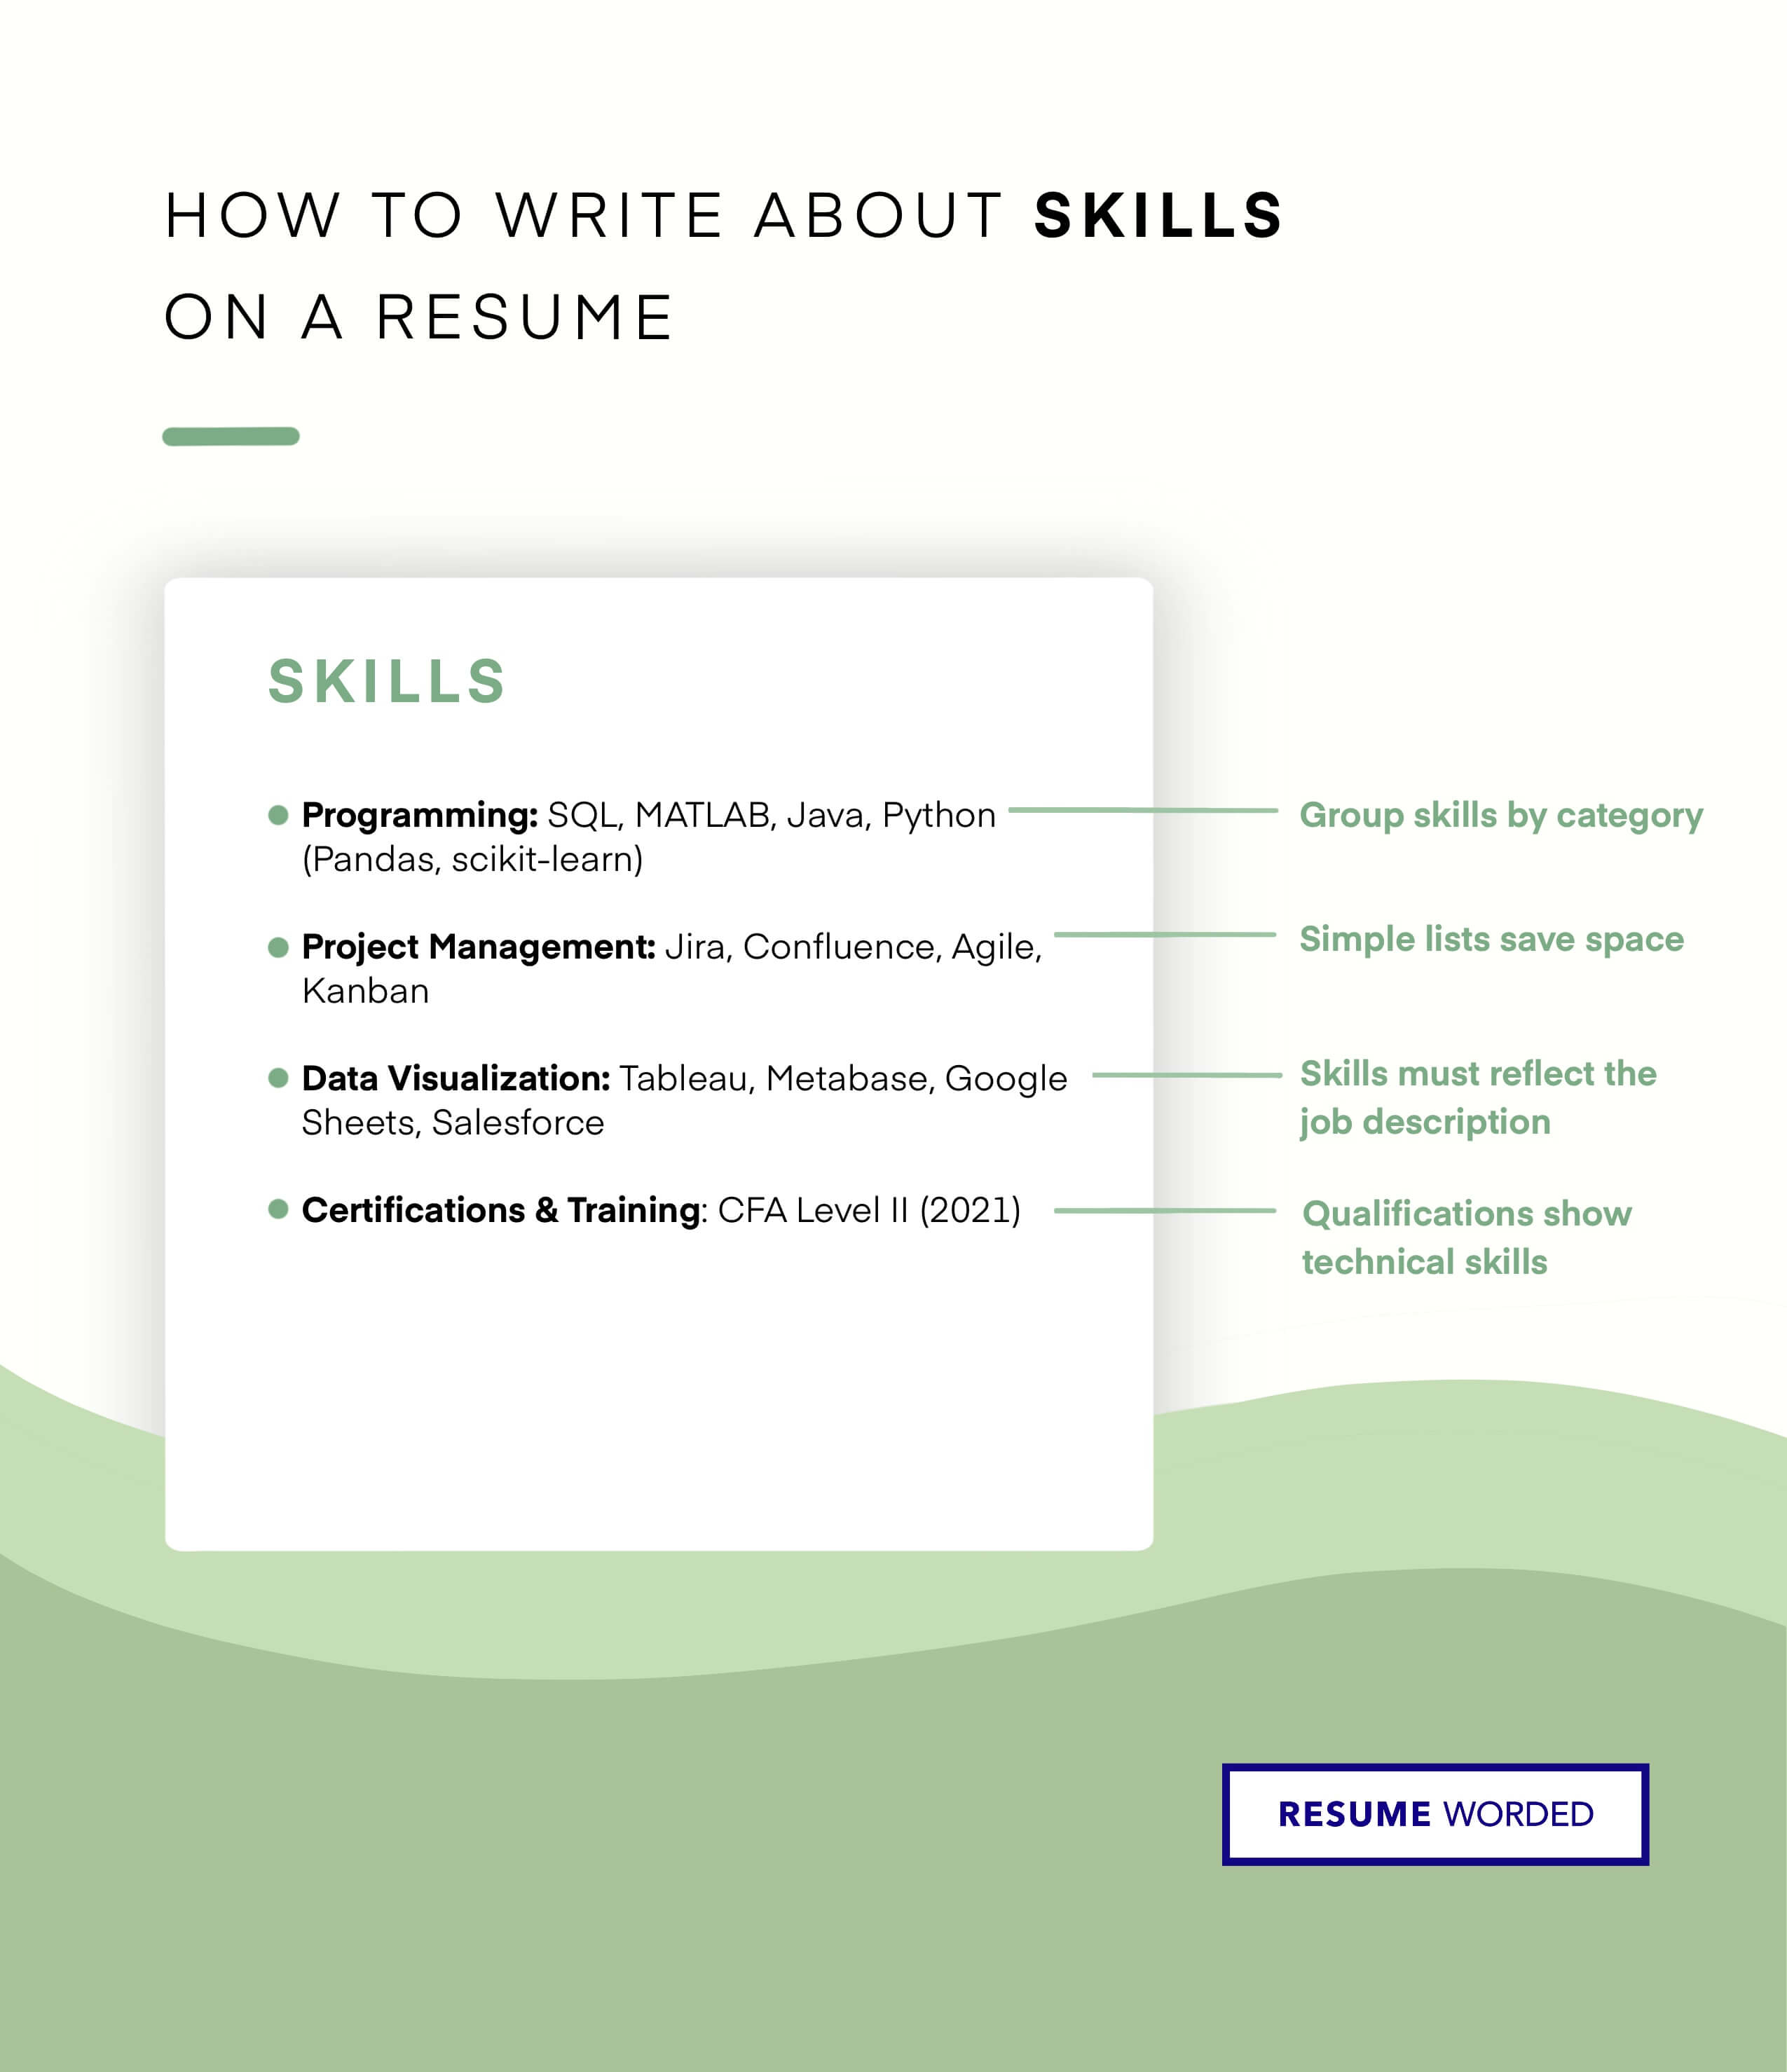 Ensure your skills list is updated and thorough. - Human Resources Specialist Resume